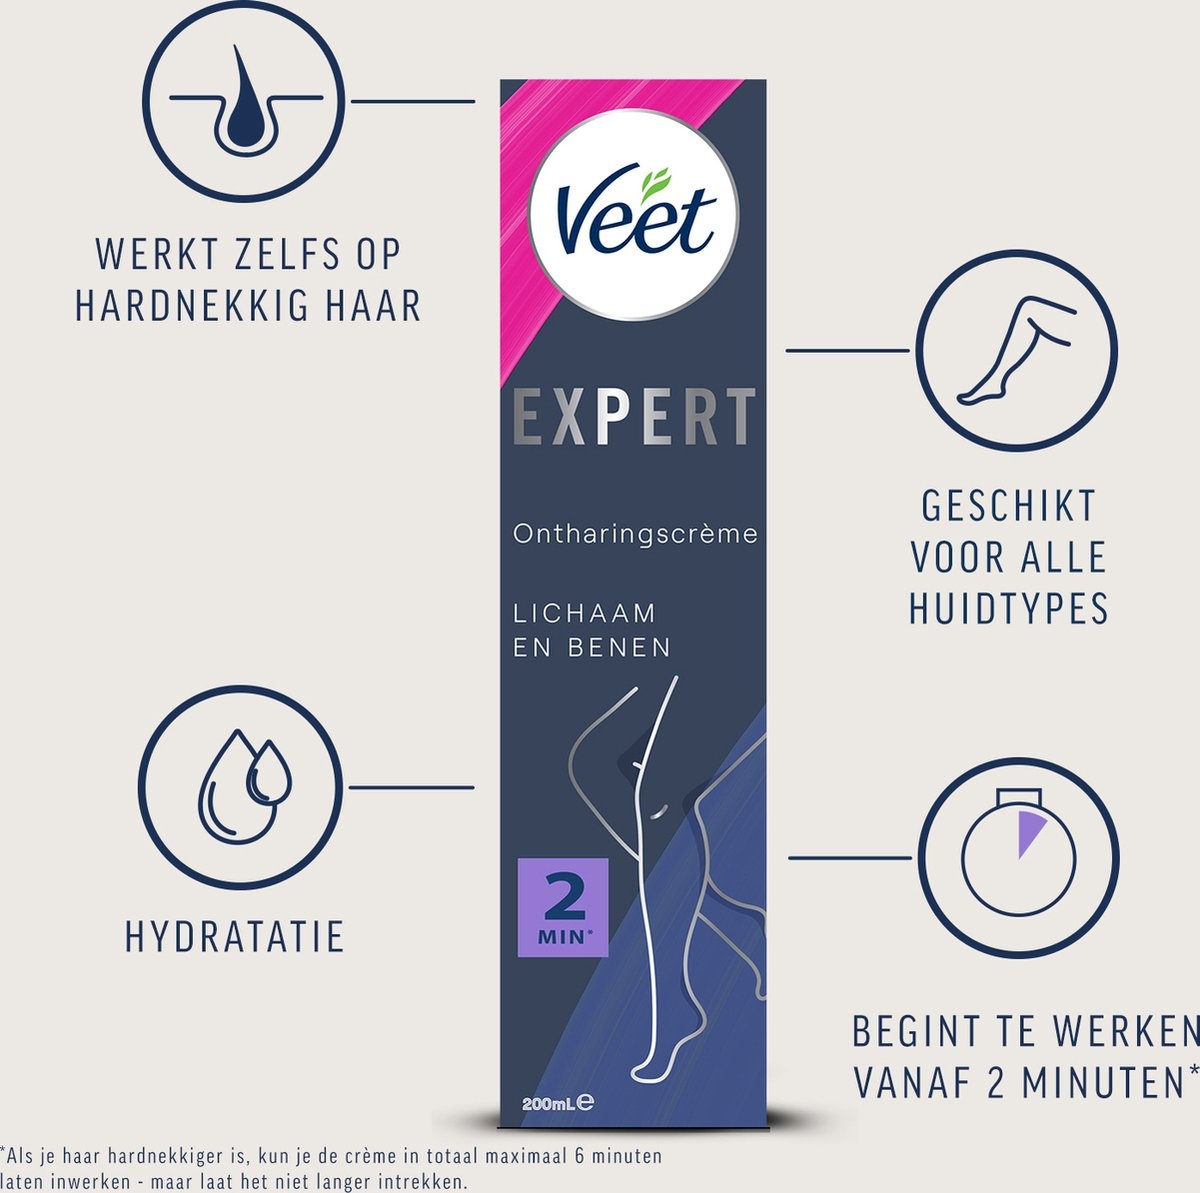 Veet Expert Hair Removal Cream with shea butter - Body & legs - All skin types - 200ml - Packaging damaged